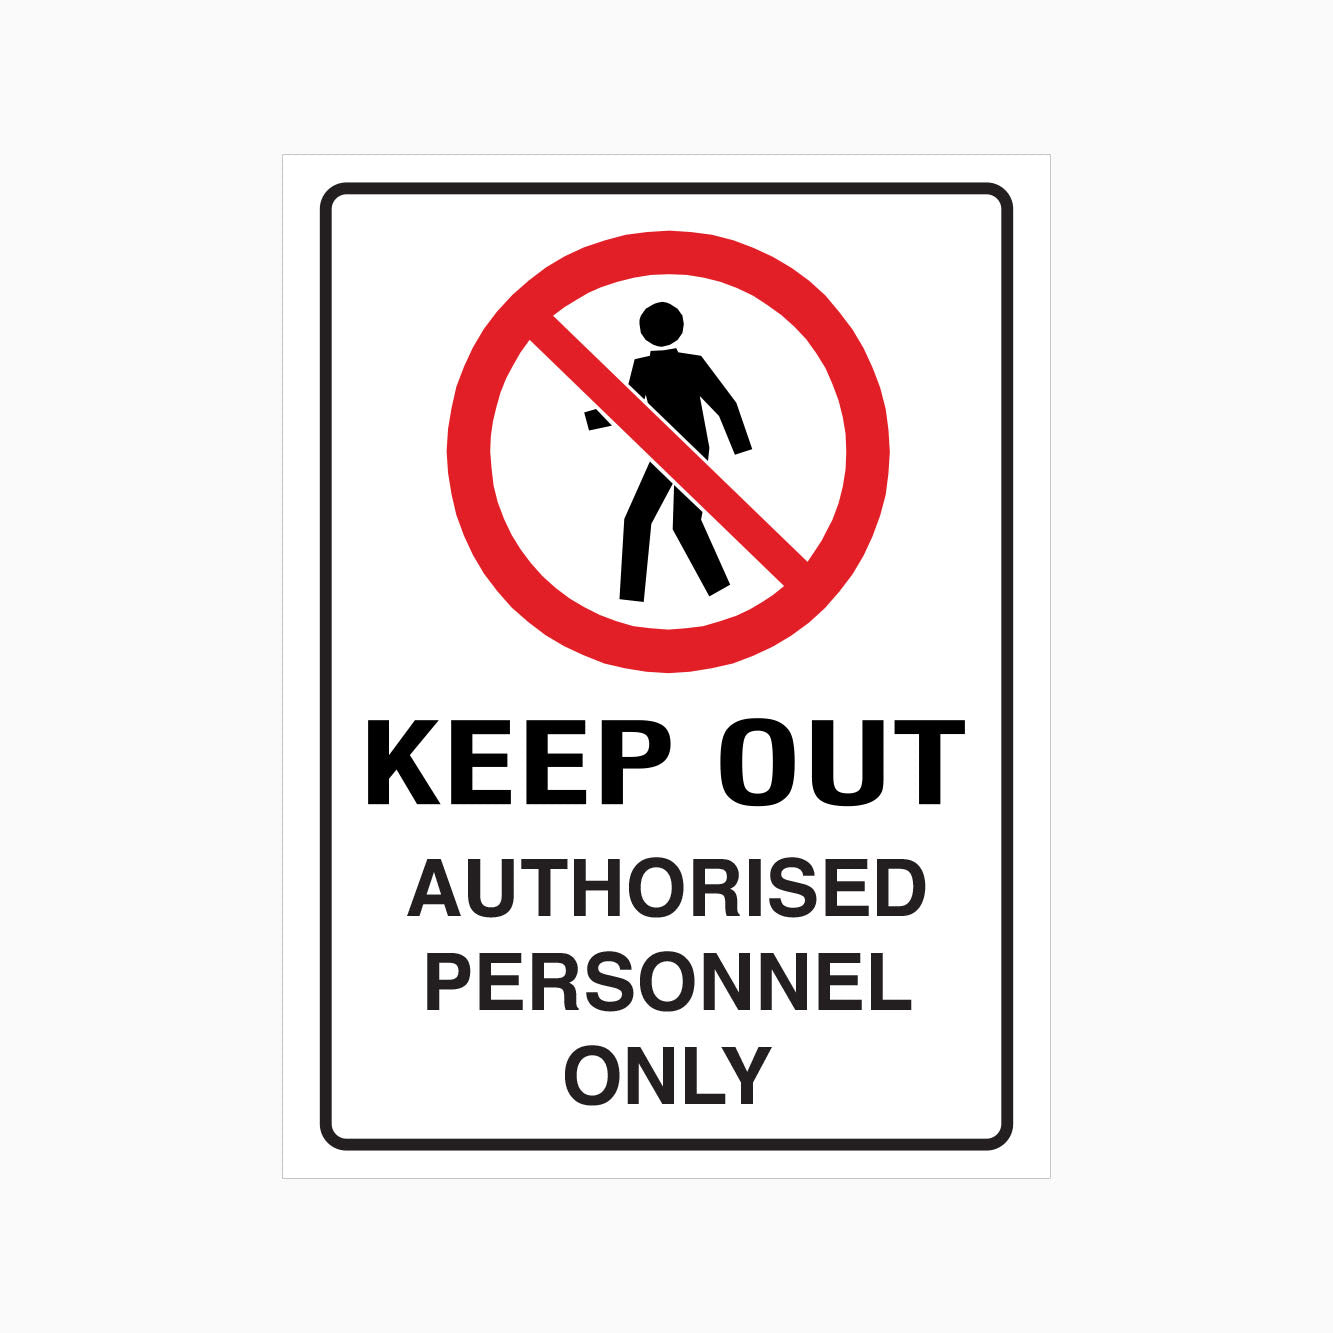 KEEP OUT AUTHORISED PERSONNEL ONLY SIGN - GET SIGNS